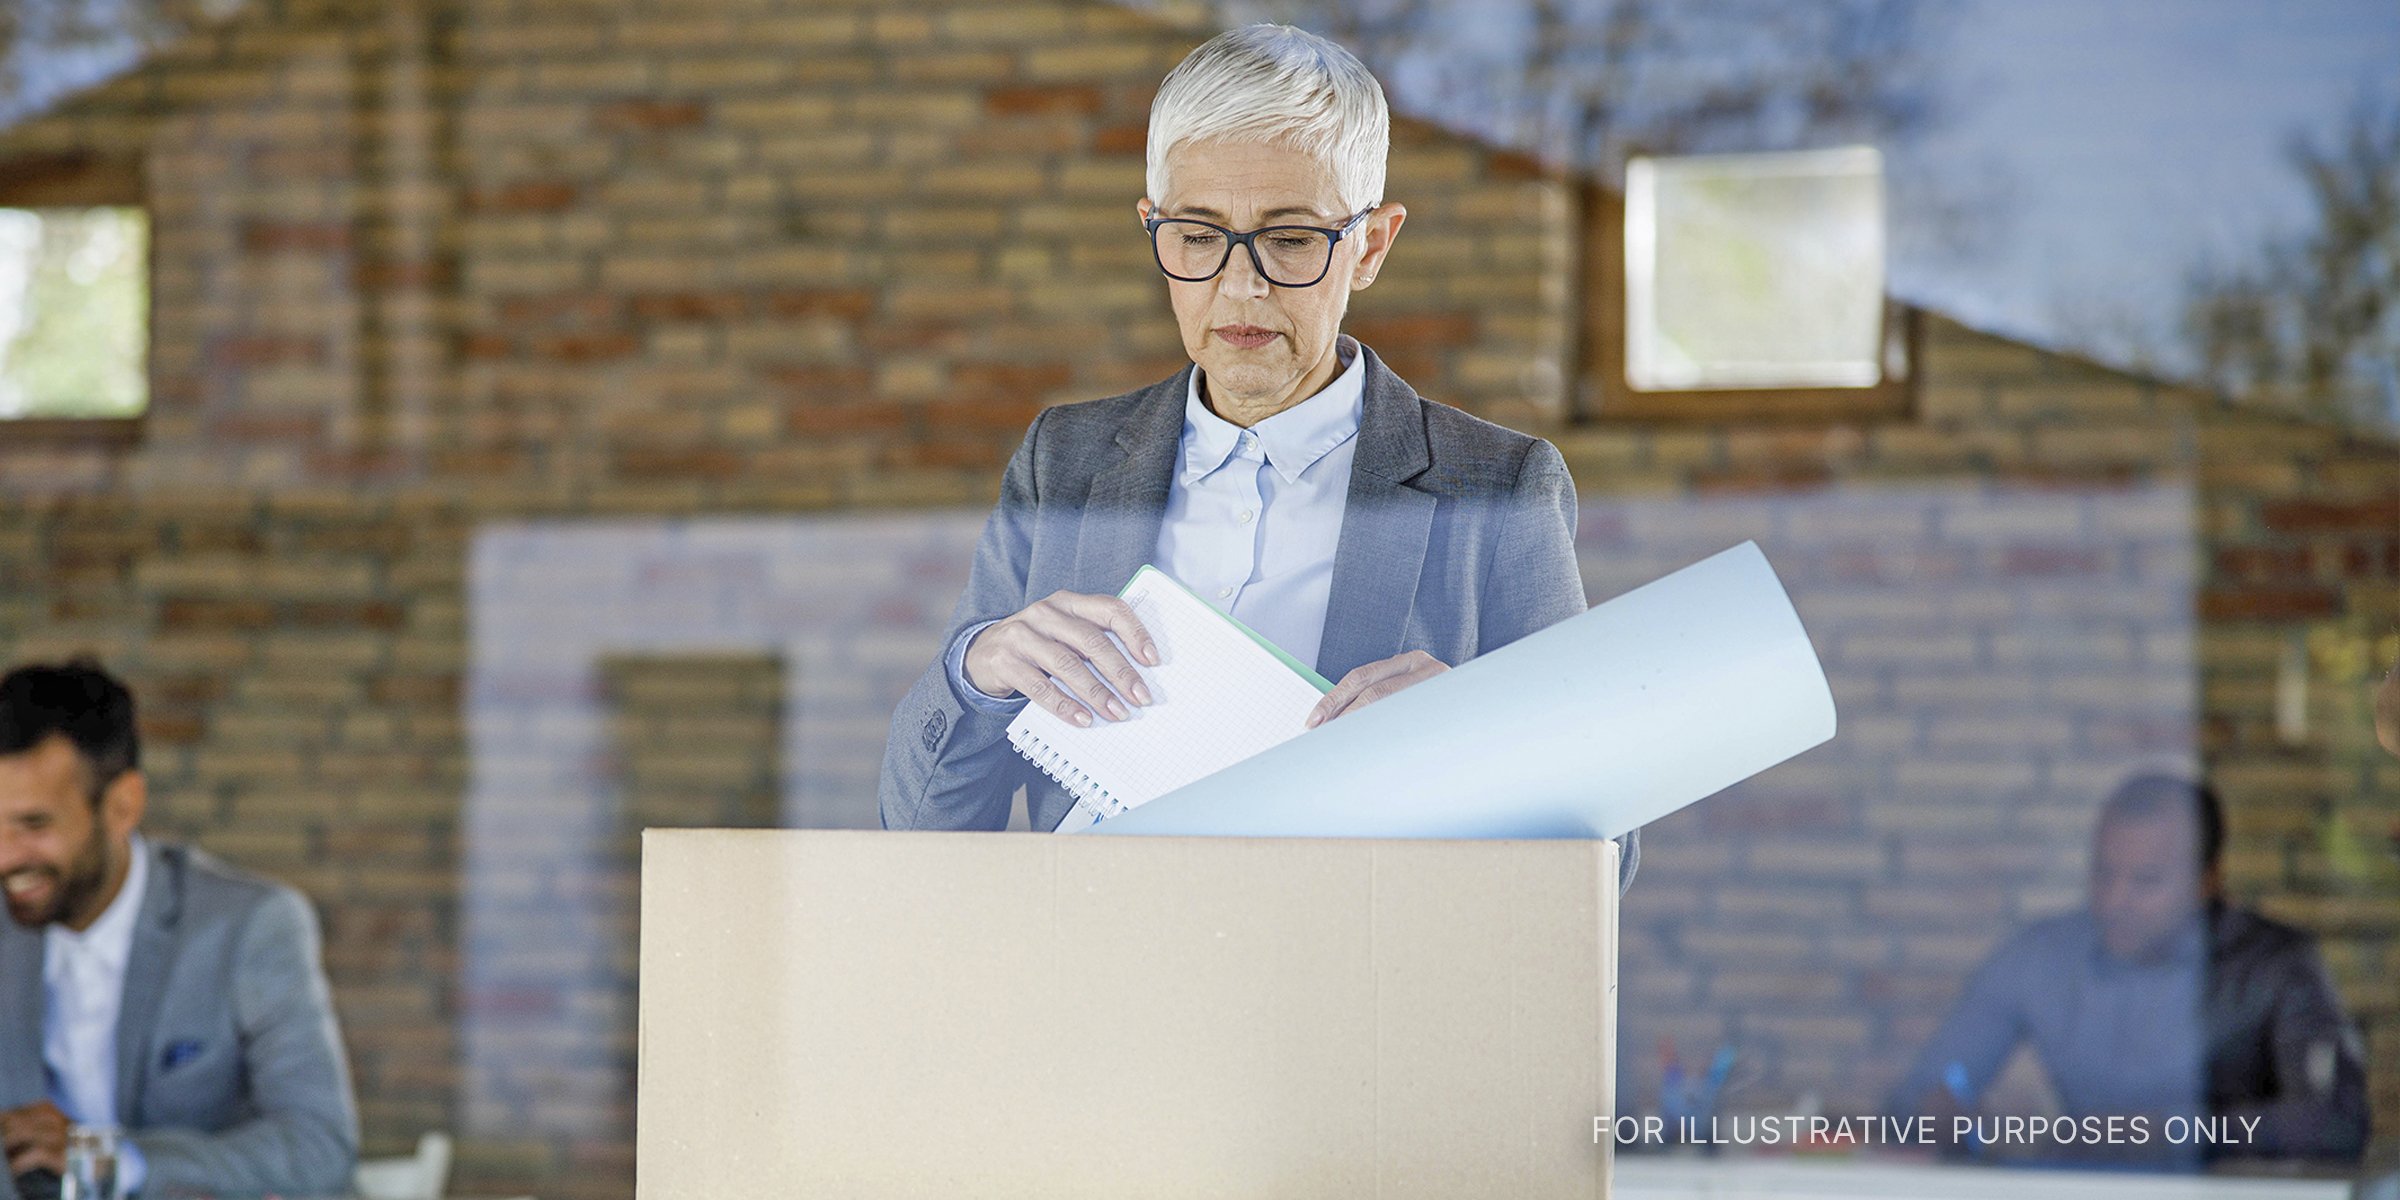 Woman putting things away in a box | Source: Shutterstock